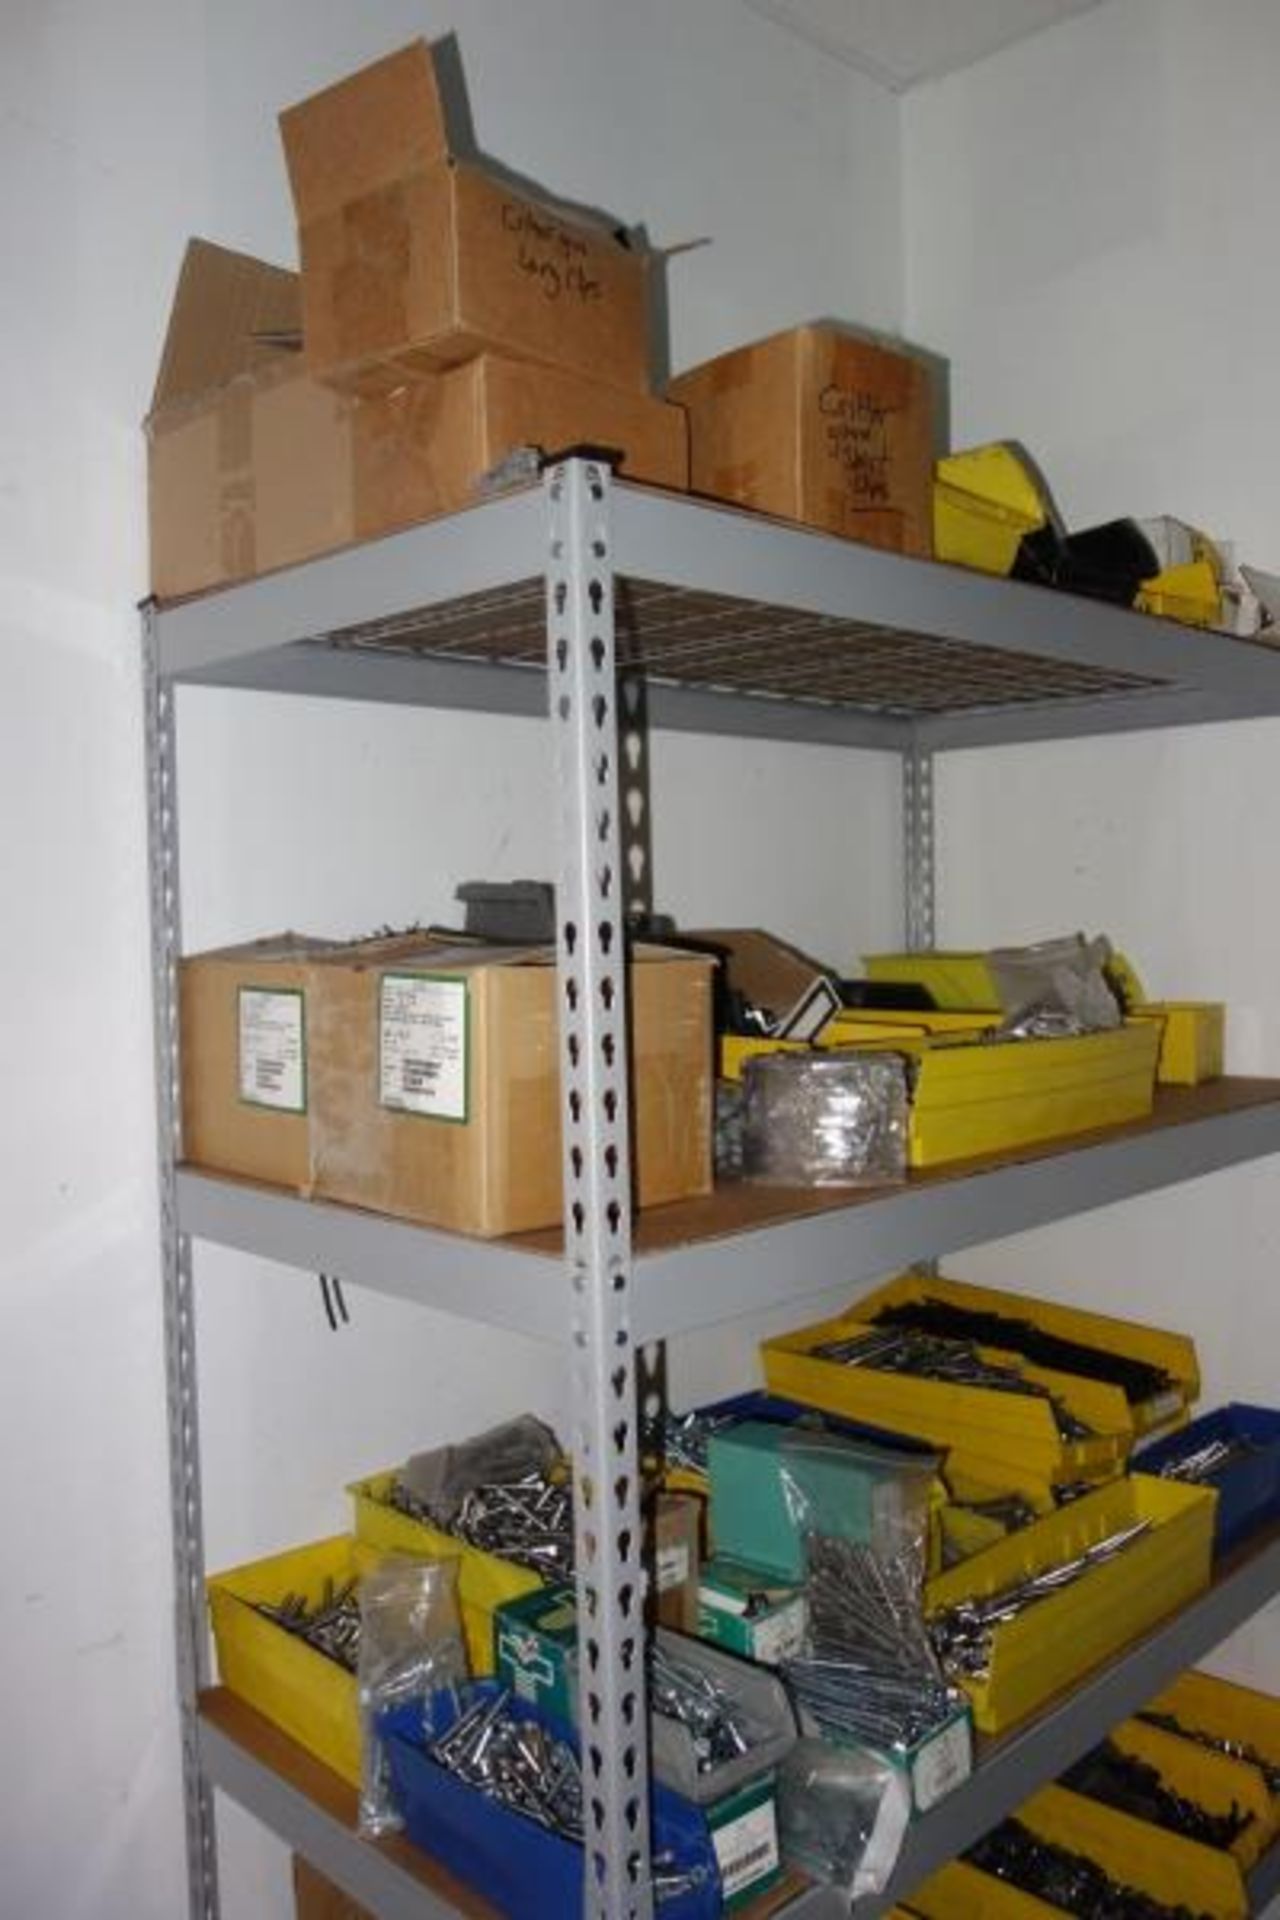 Contents of Parts Room - Hardware / Conduit - Image 8 of 20